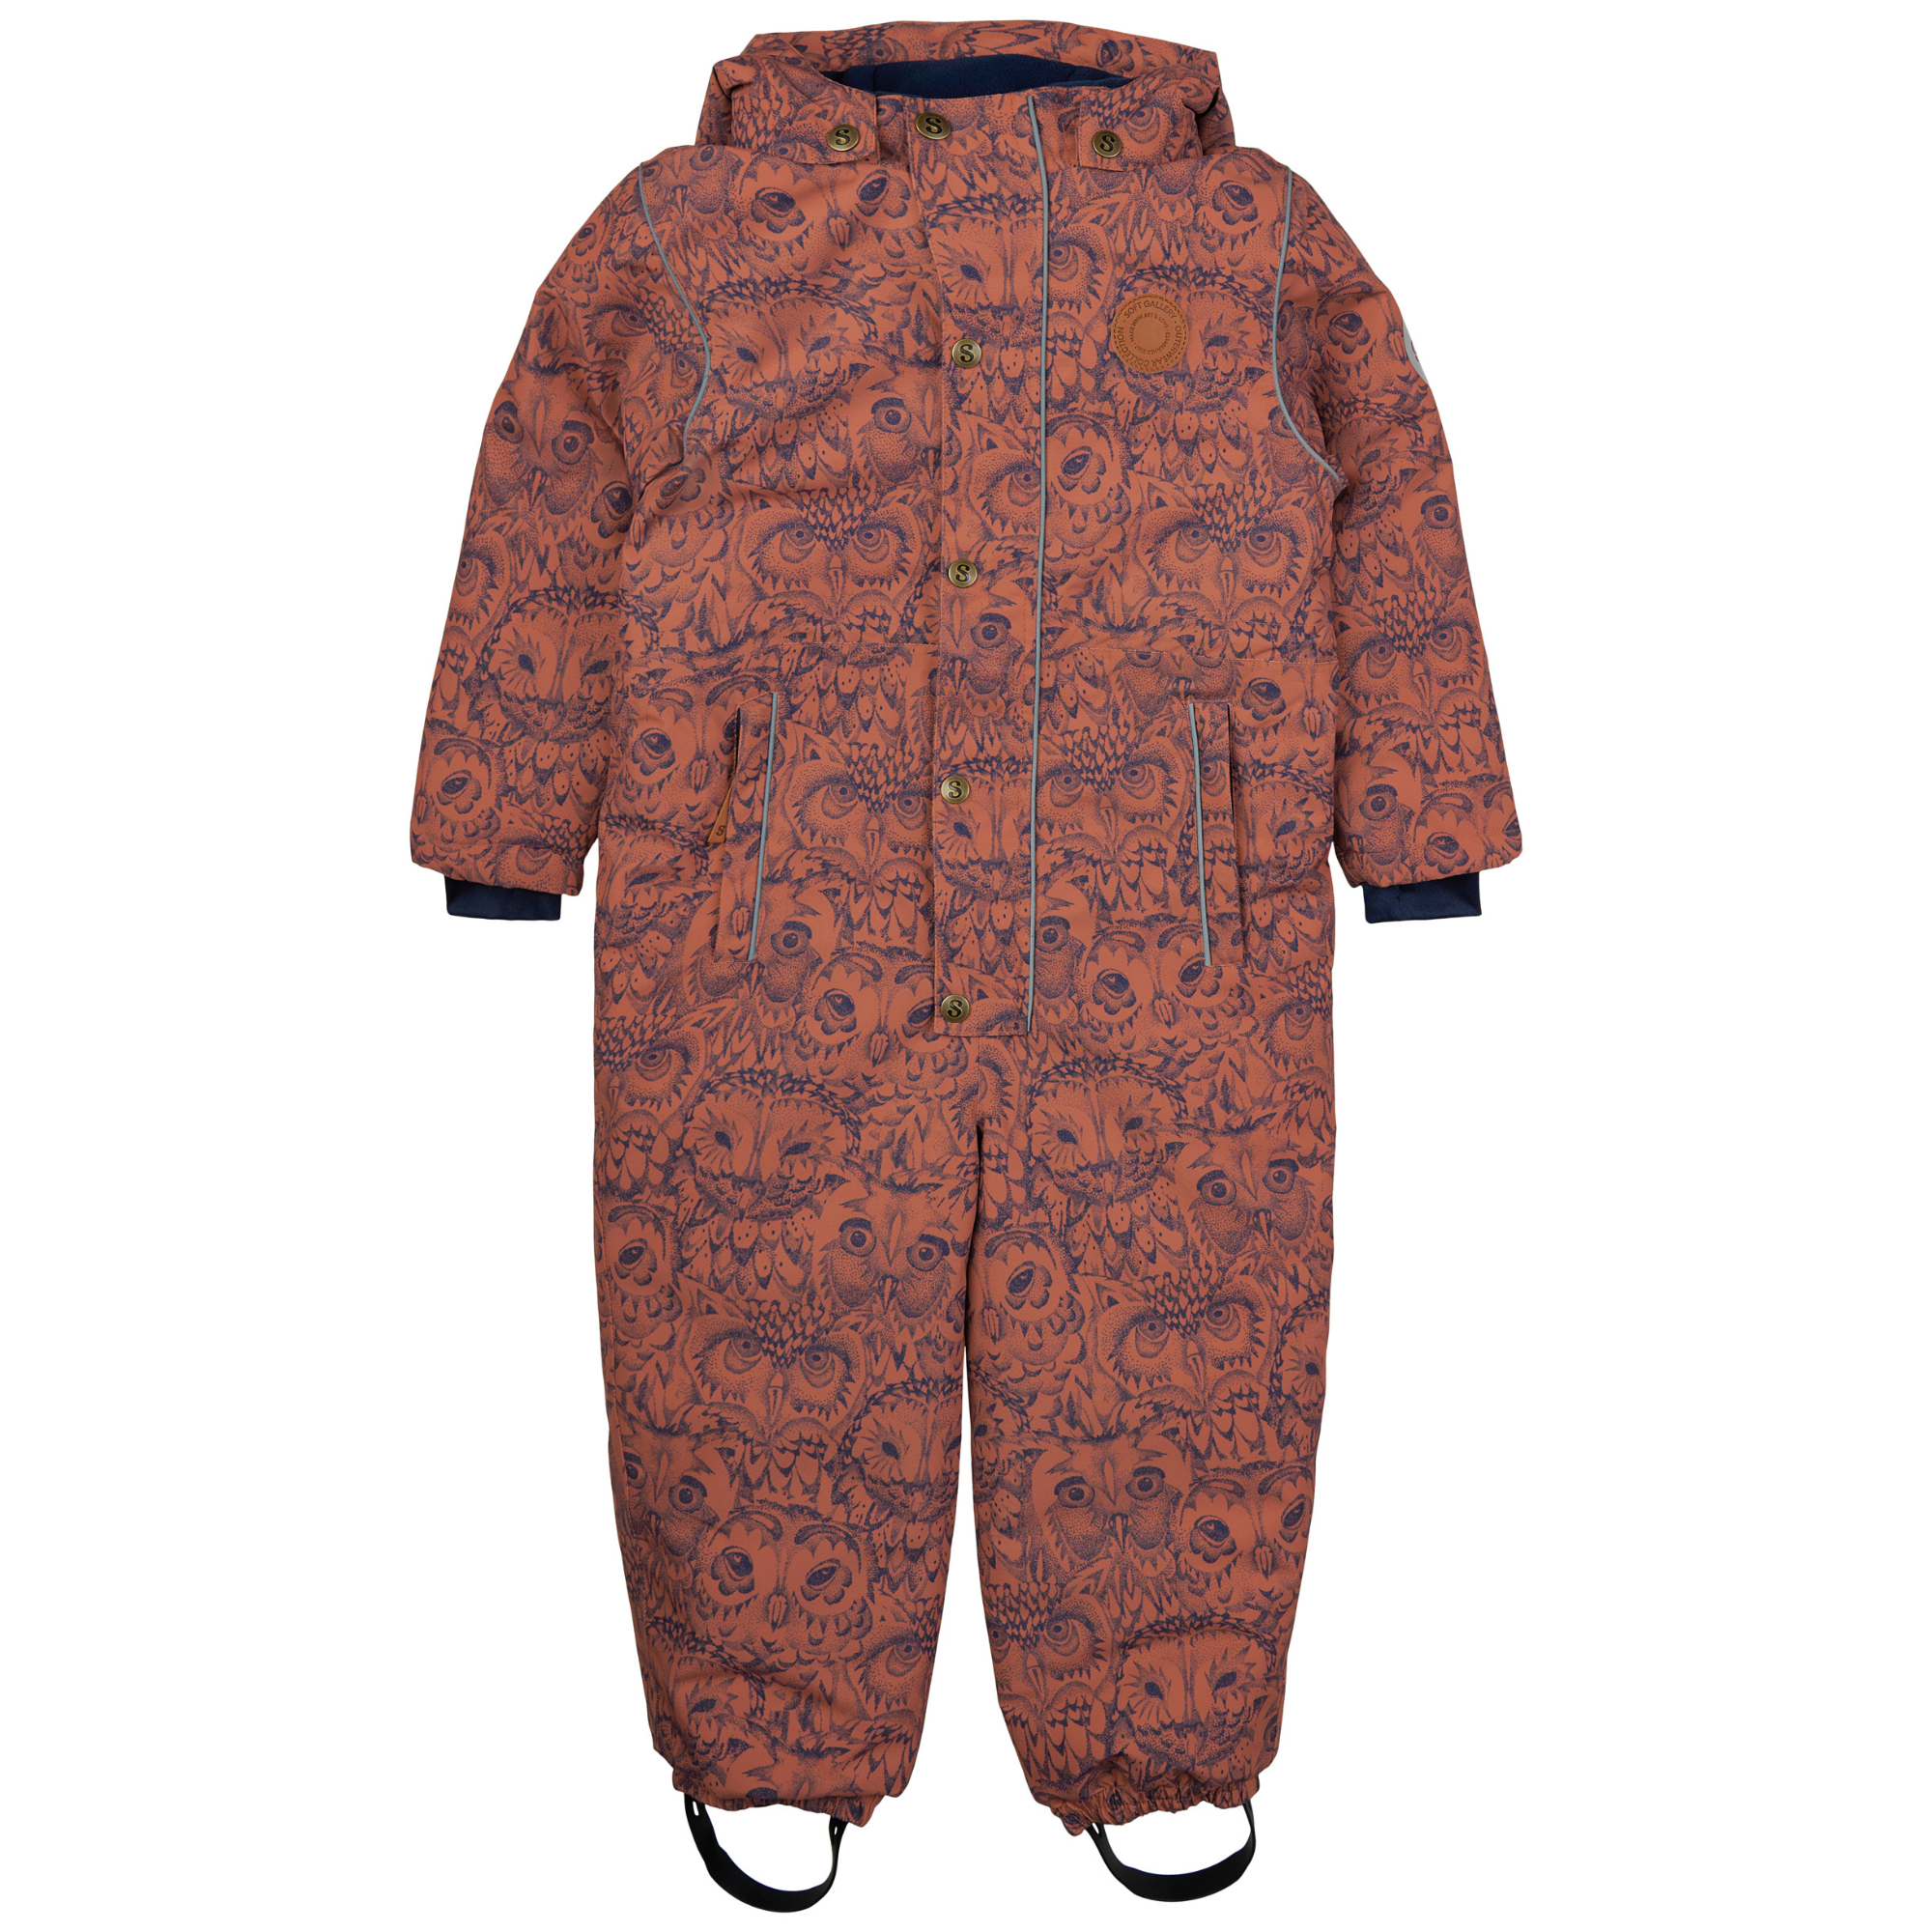 Soft Gallery - Merle Snowsuit, SG2201 - Brown Patina / Owl